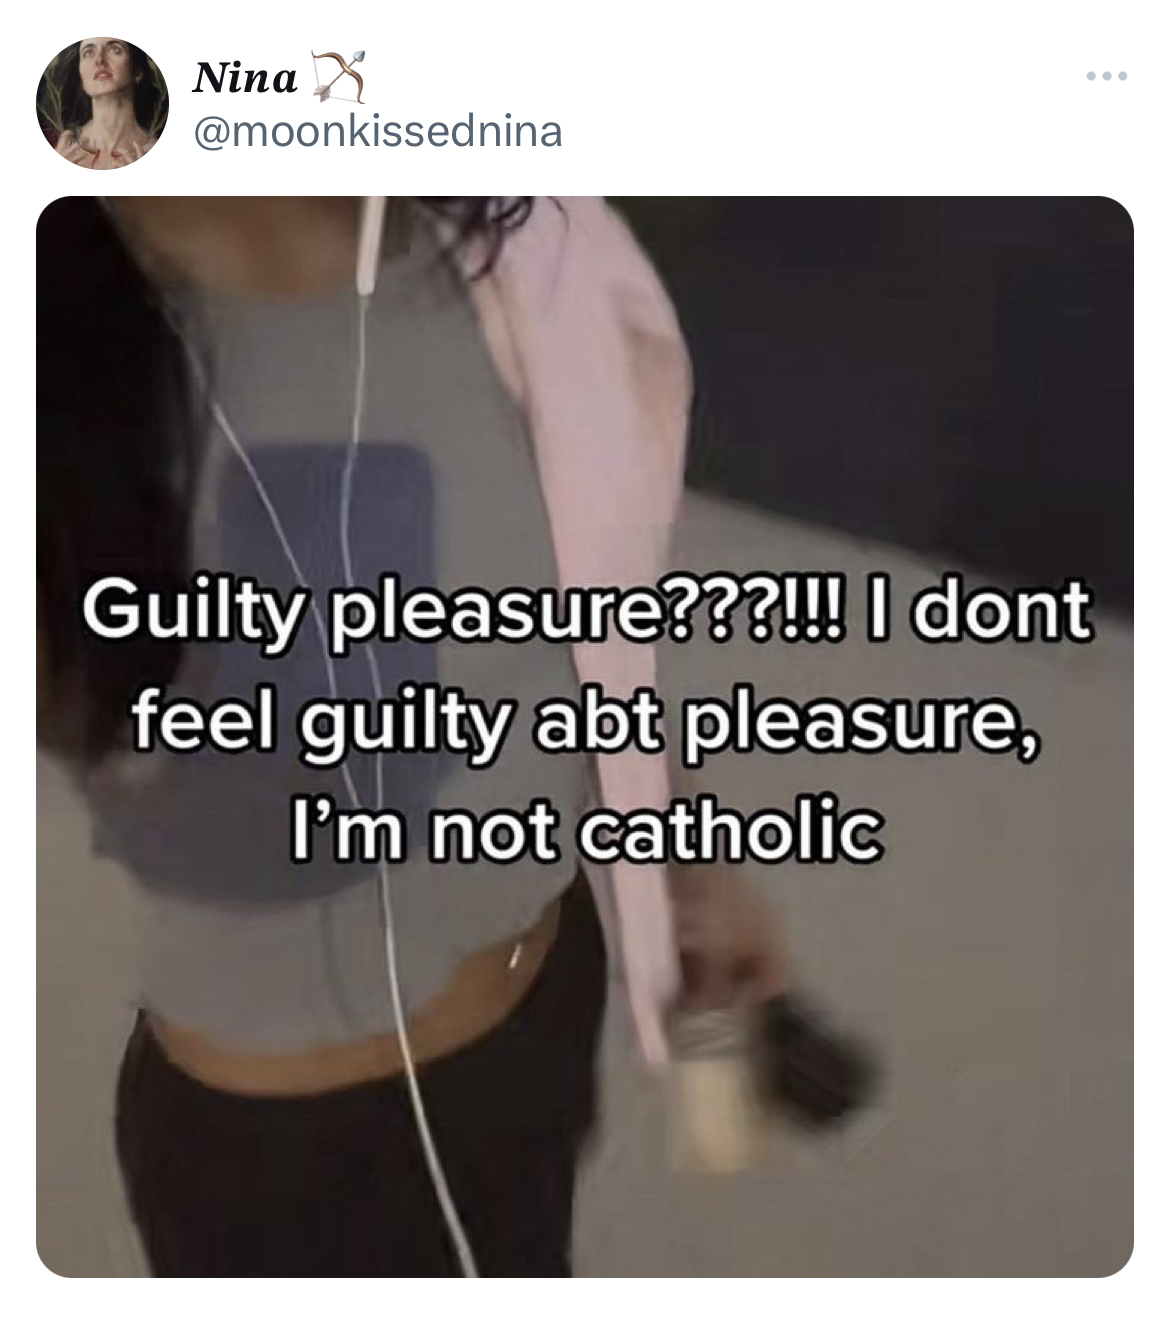 Savage and Unhinged tweets shoulder - Nina Guilty pleasure???!!! I dont feel guilty abt pleasure, I'm not catholic